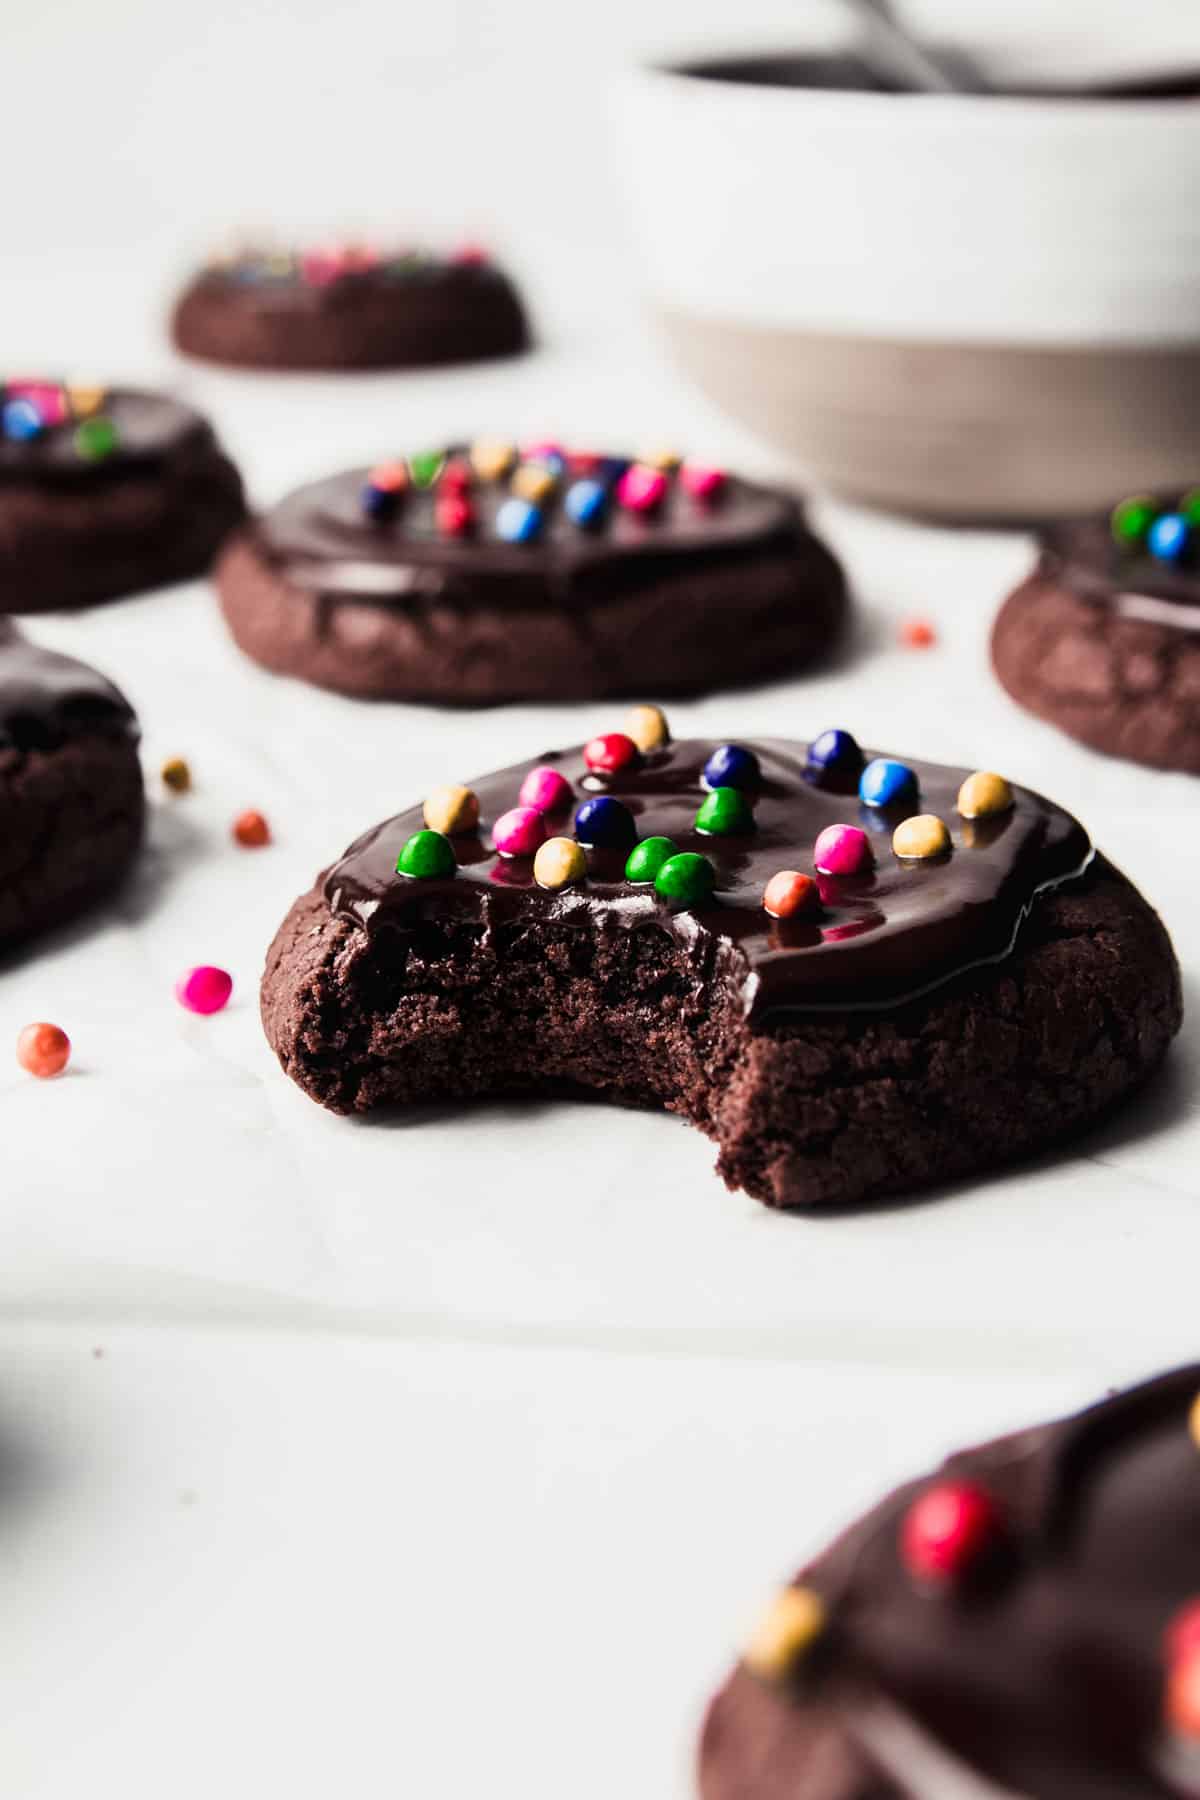 A rich brownie cookie topped with ganache and candy sprinkles, a bite taken showing interior texture.